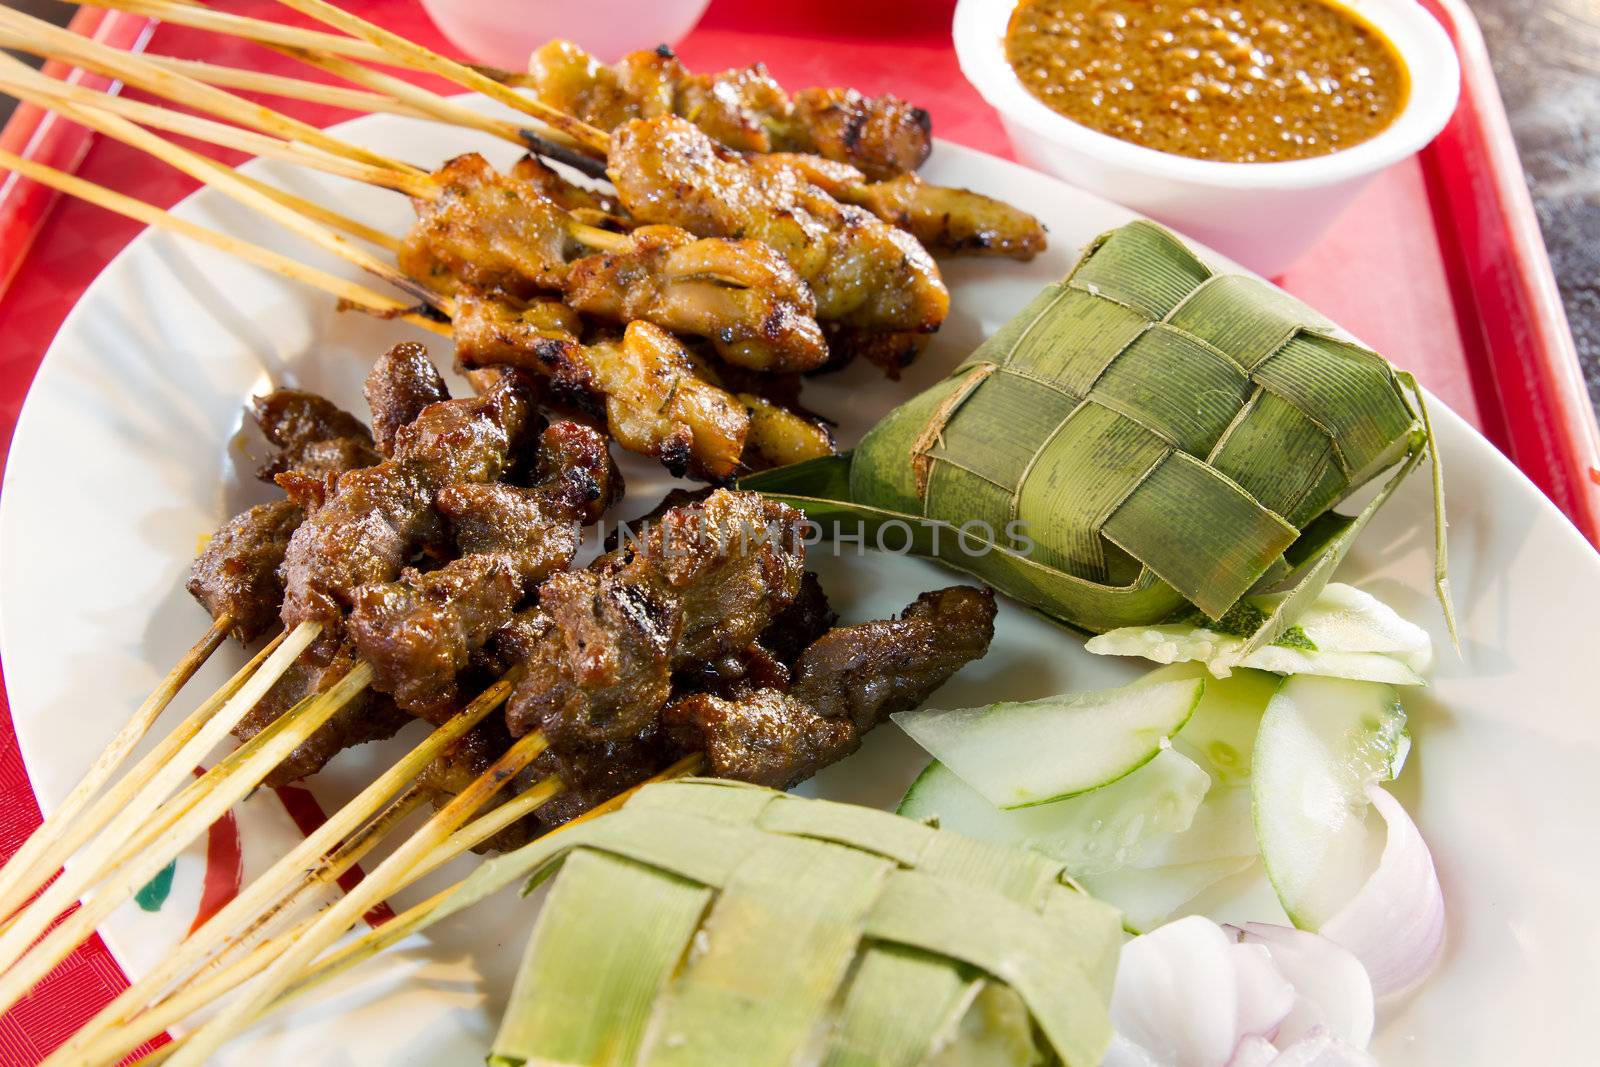 Chicken and Lamb Satay Skewers with Ketupat Rice and Peanut Sauce